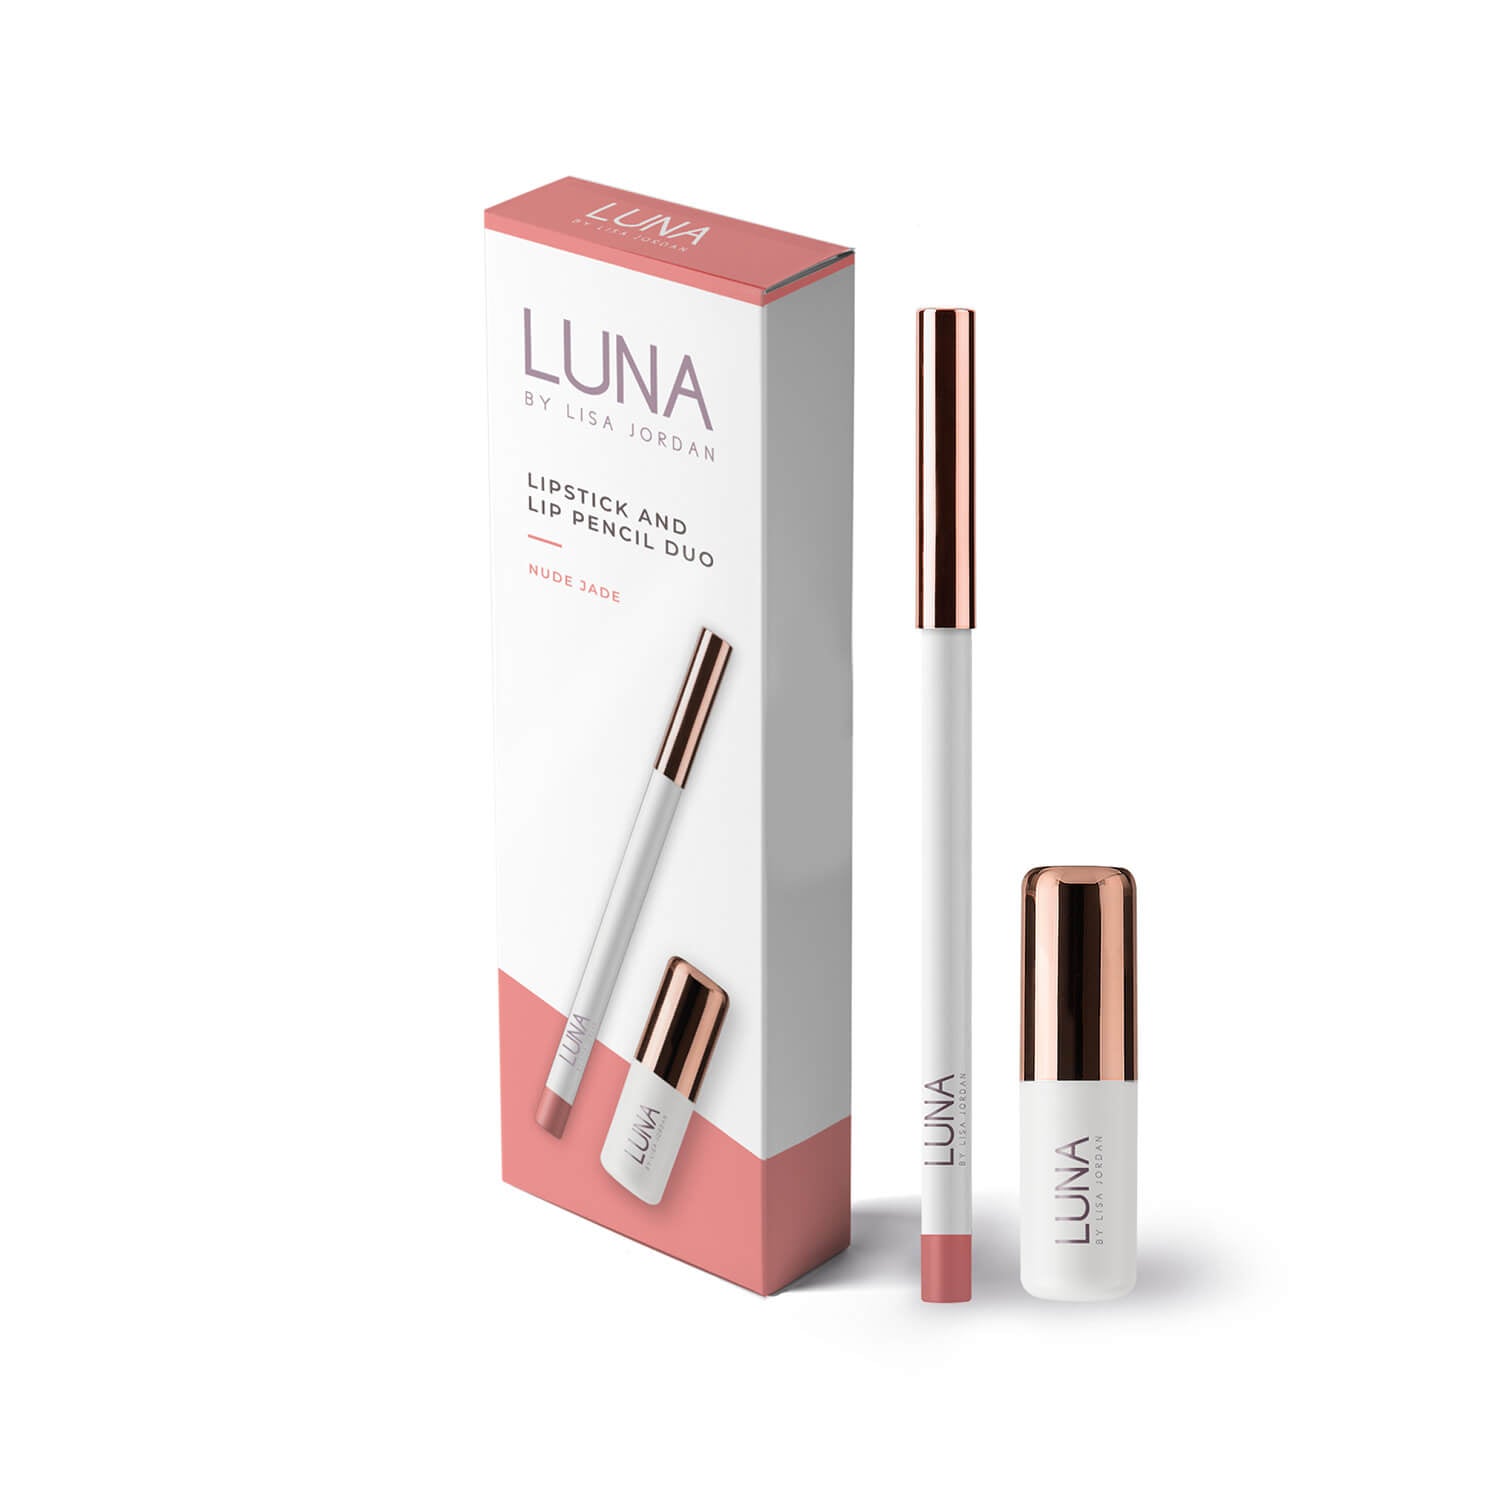 Luna By Lisa Nude Jade Lip Duo - Nude 1 Shaws Department Stores